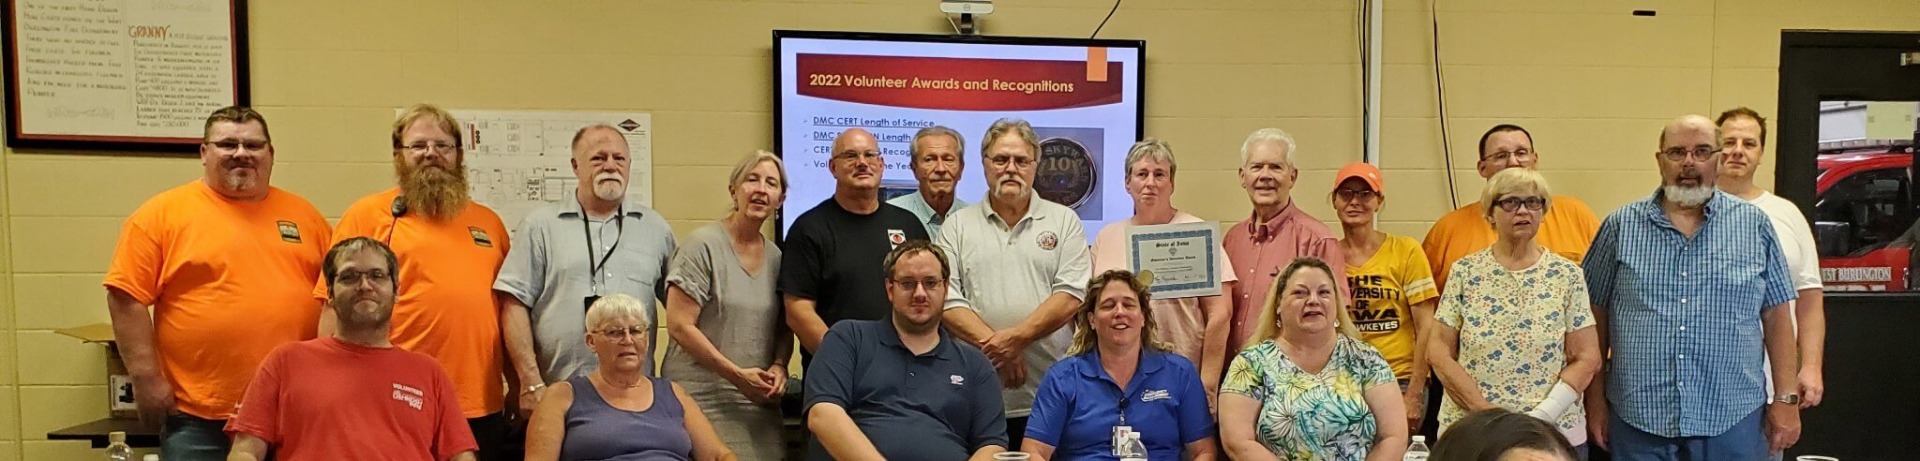 Des Moines County CERT Volunteer Awards and Recognitions